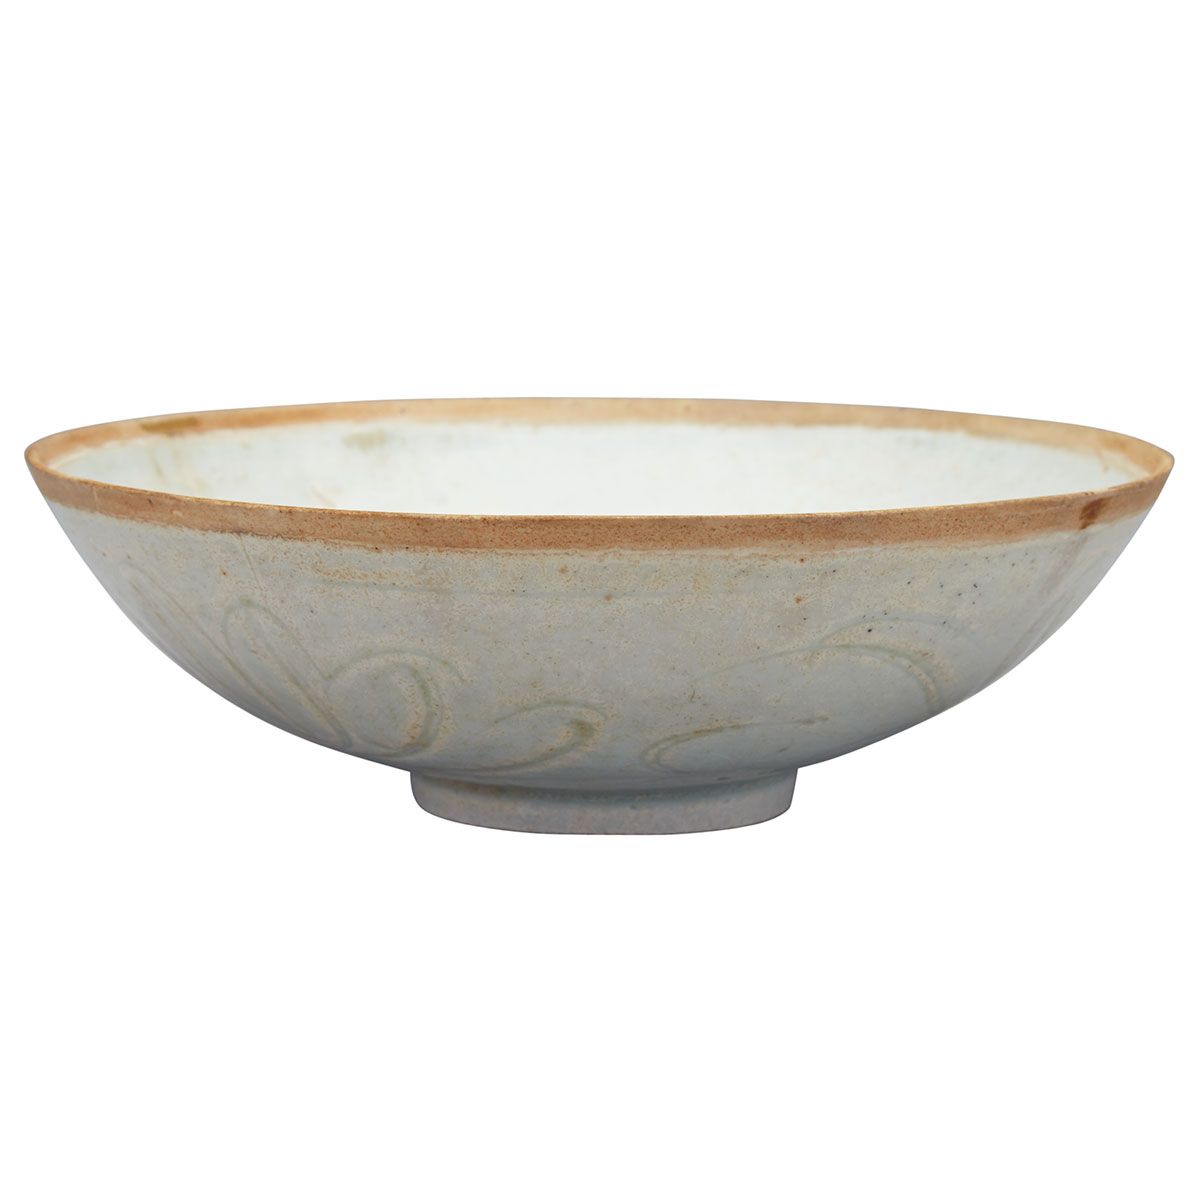 Yingqing Shallow Bowl, Song Dynasty